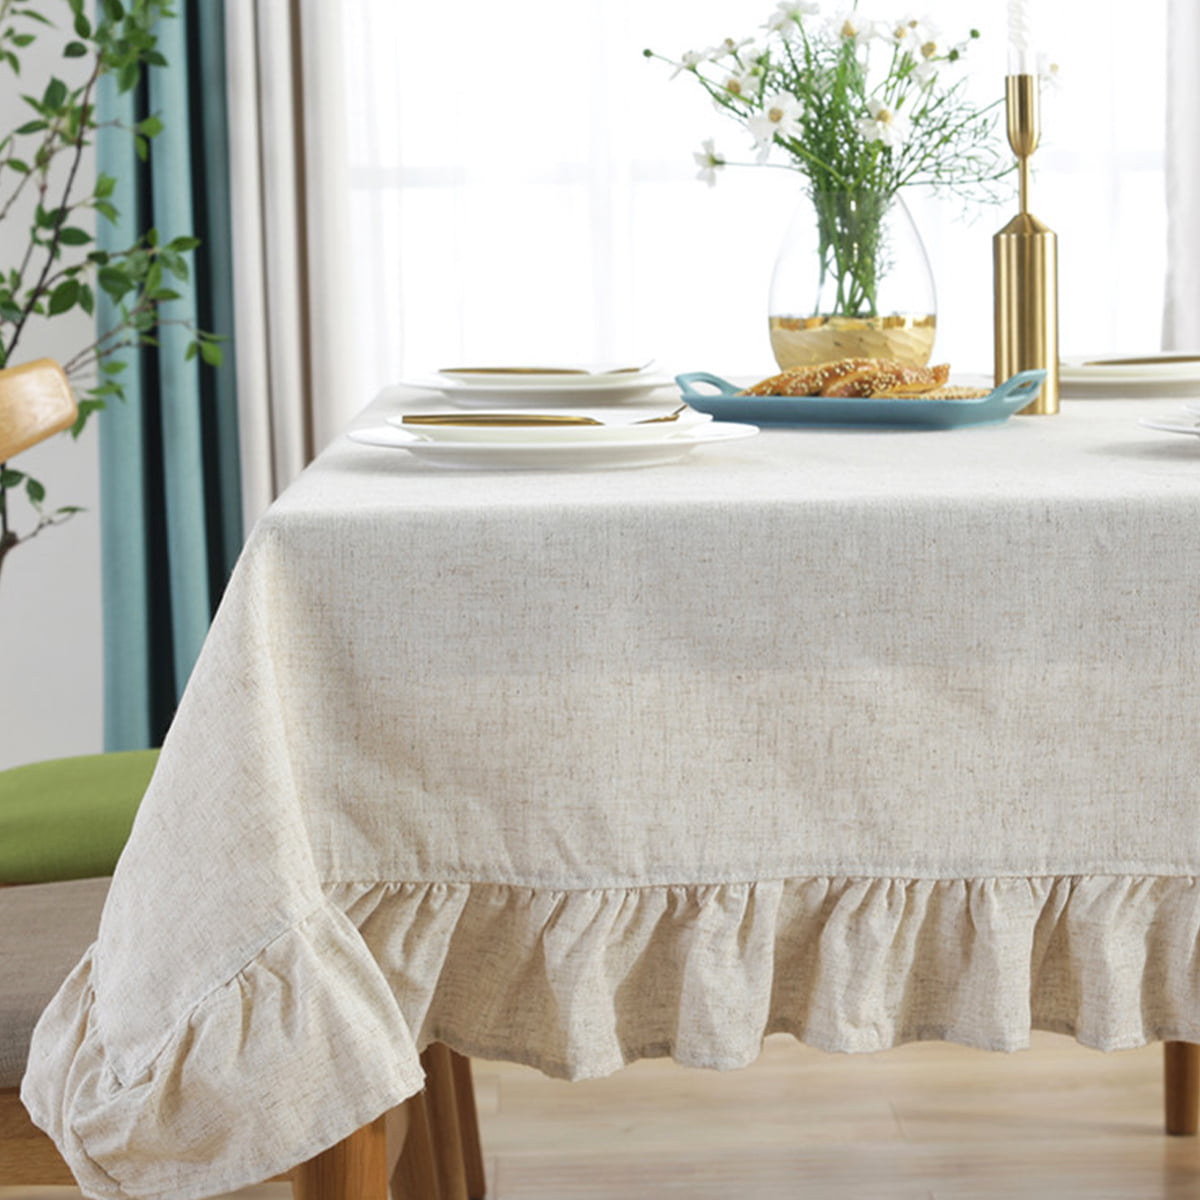 Washable Cotton Ruffles Tablecloth for Kitchen Dinning Party Home Decoration 